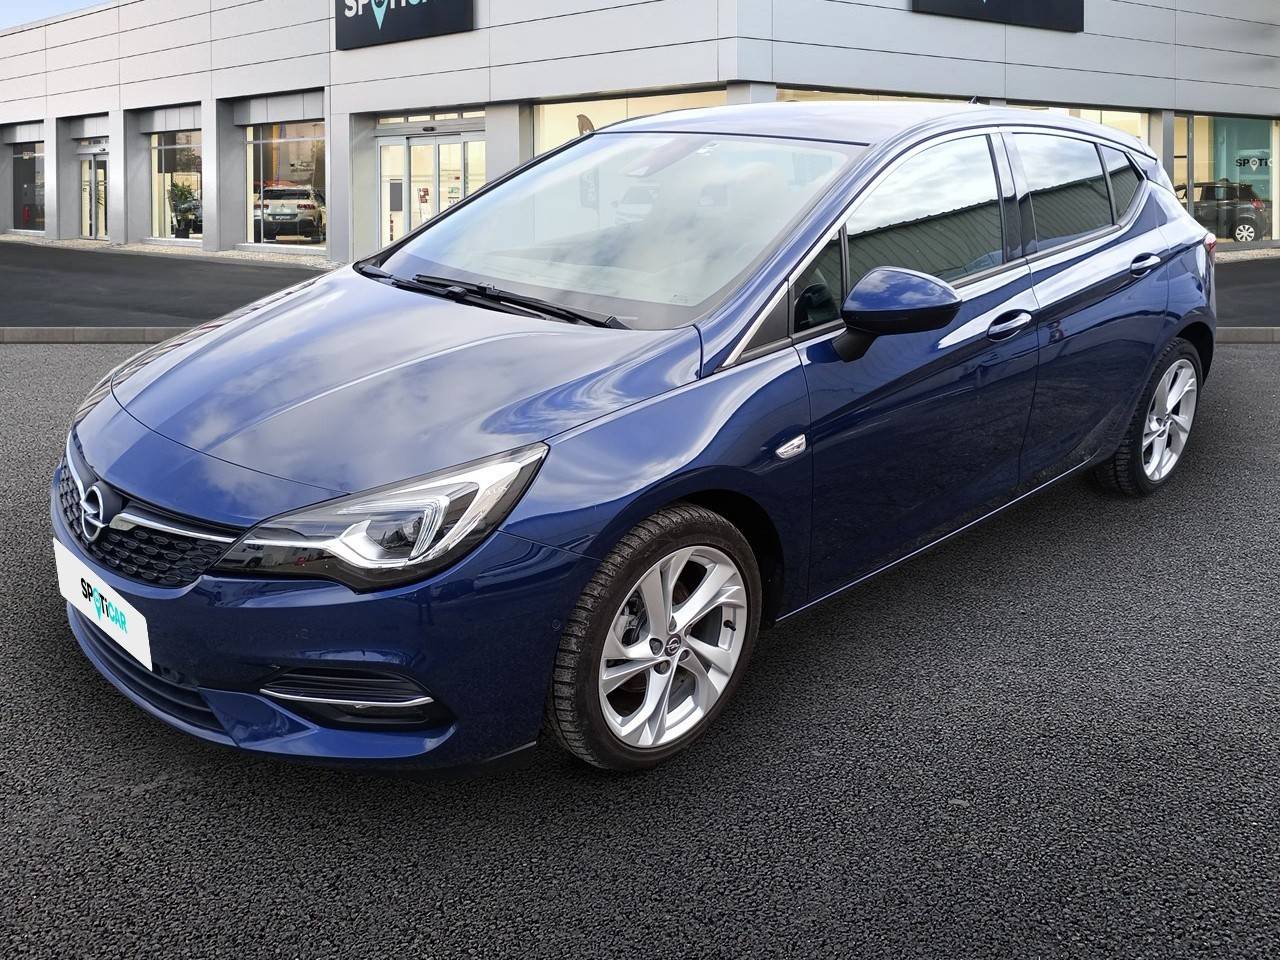 OPEL ASTRA | Astra 1.5 Diesel 122 ch BVM6 occasion - Peugeot Nîmes